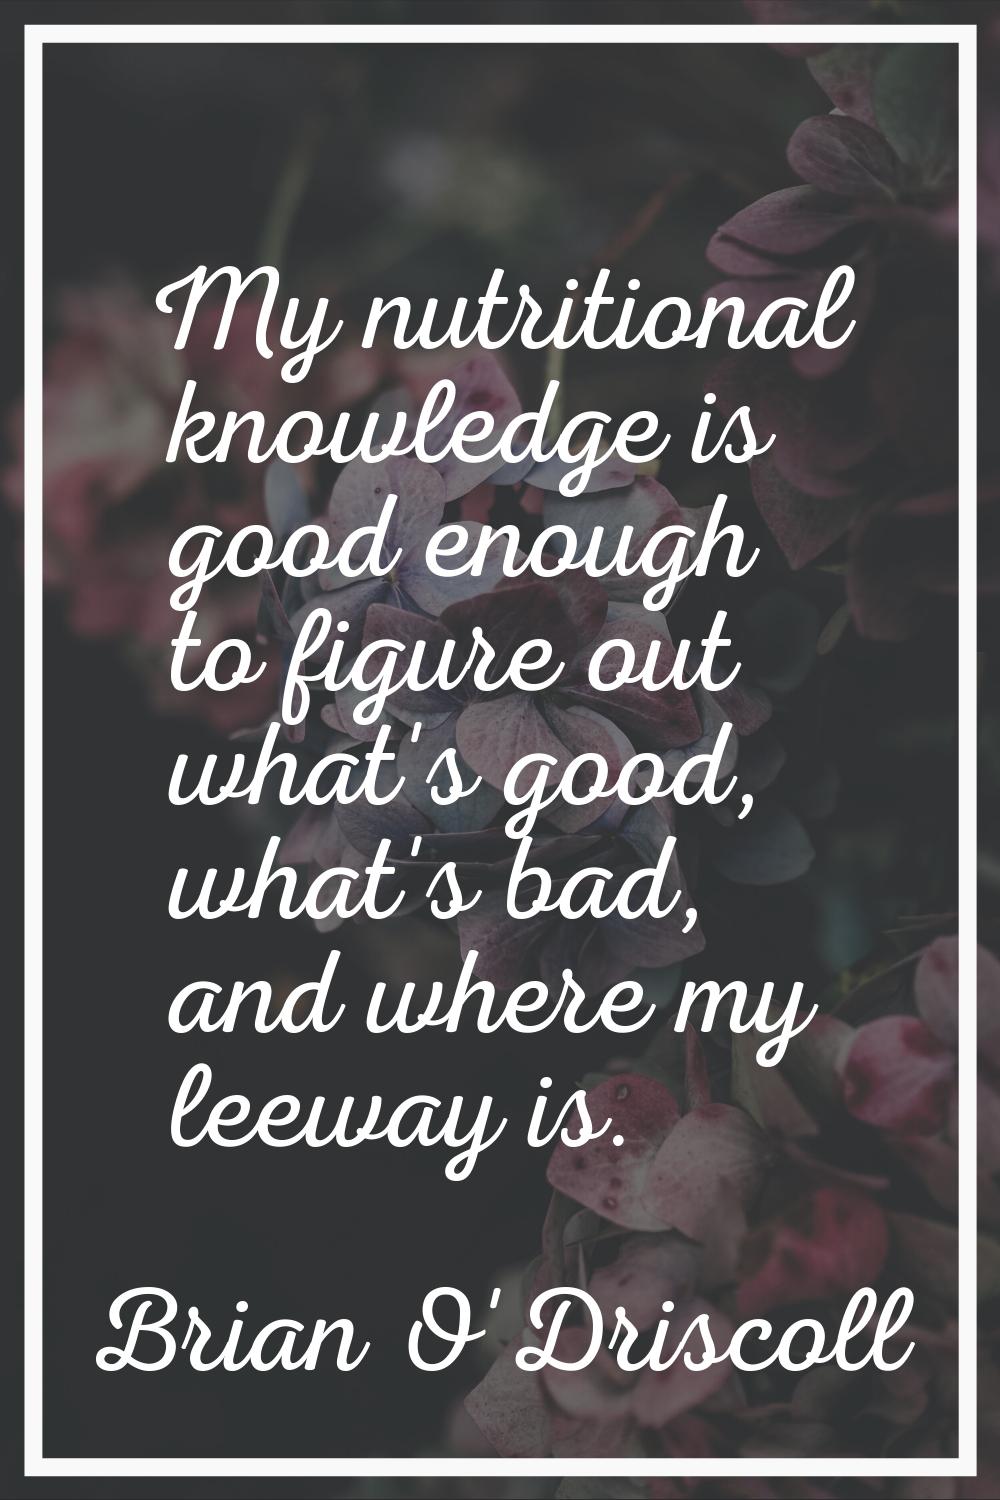 My nutritional knowledge is good enough to figure out what's good, what's bad, and where my leeway 